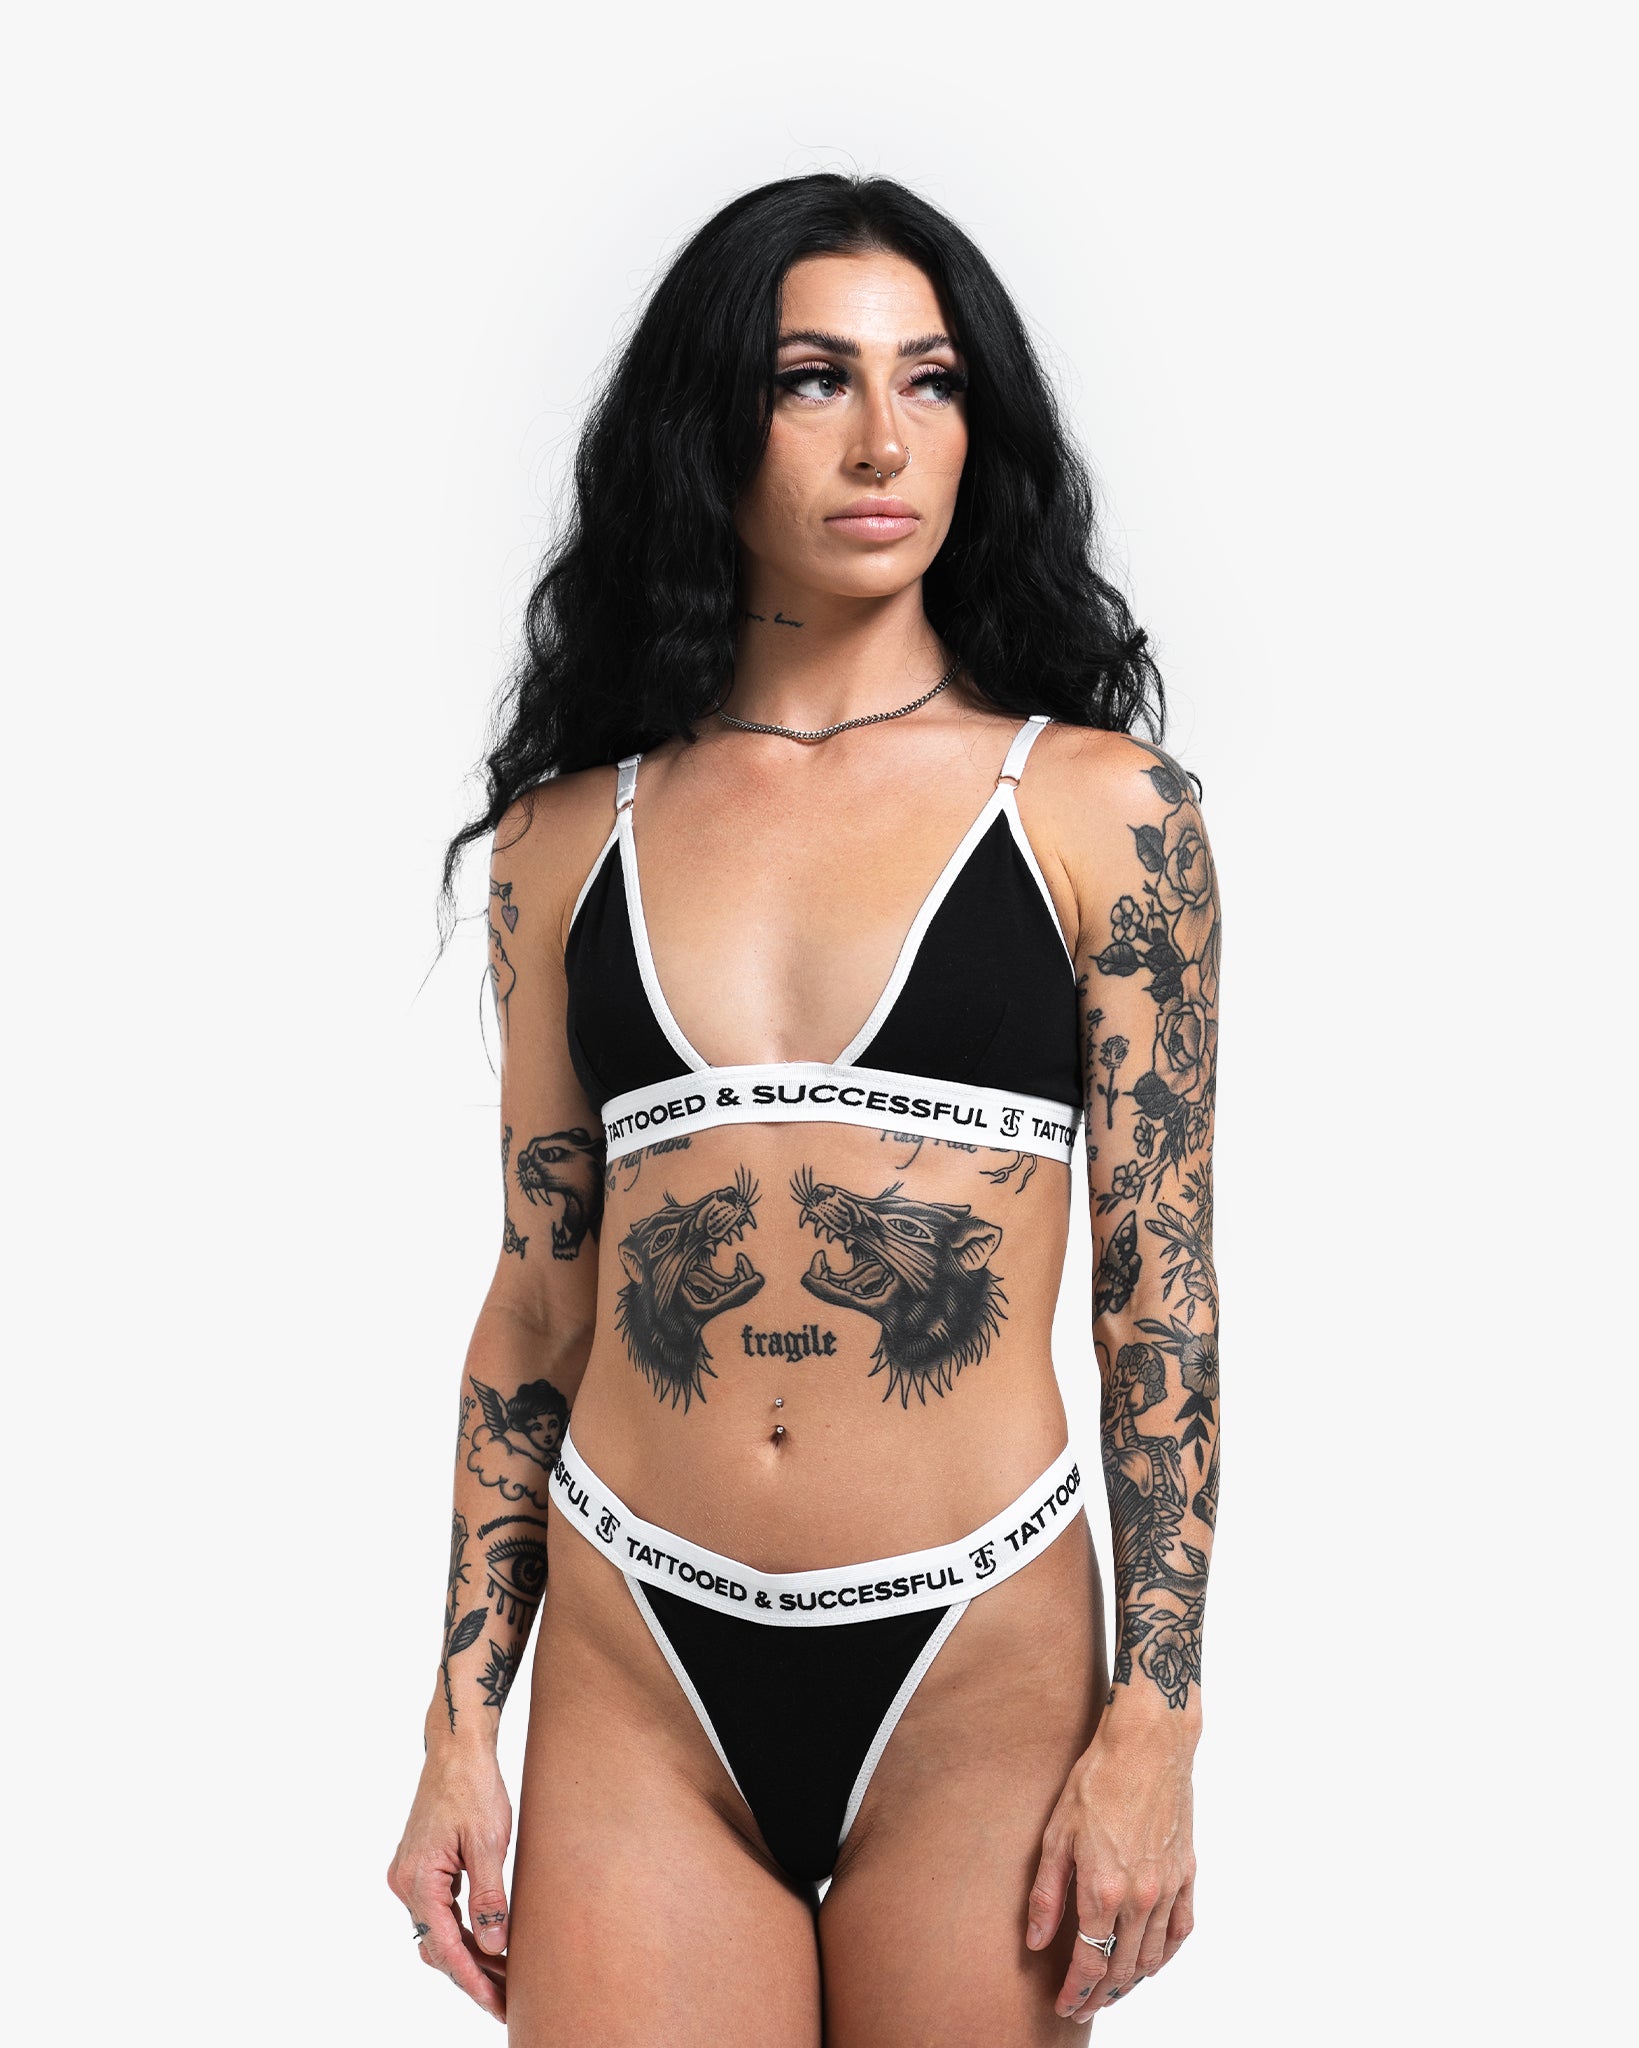 Women's Products – Tattooed & Successful